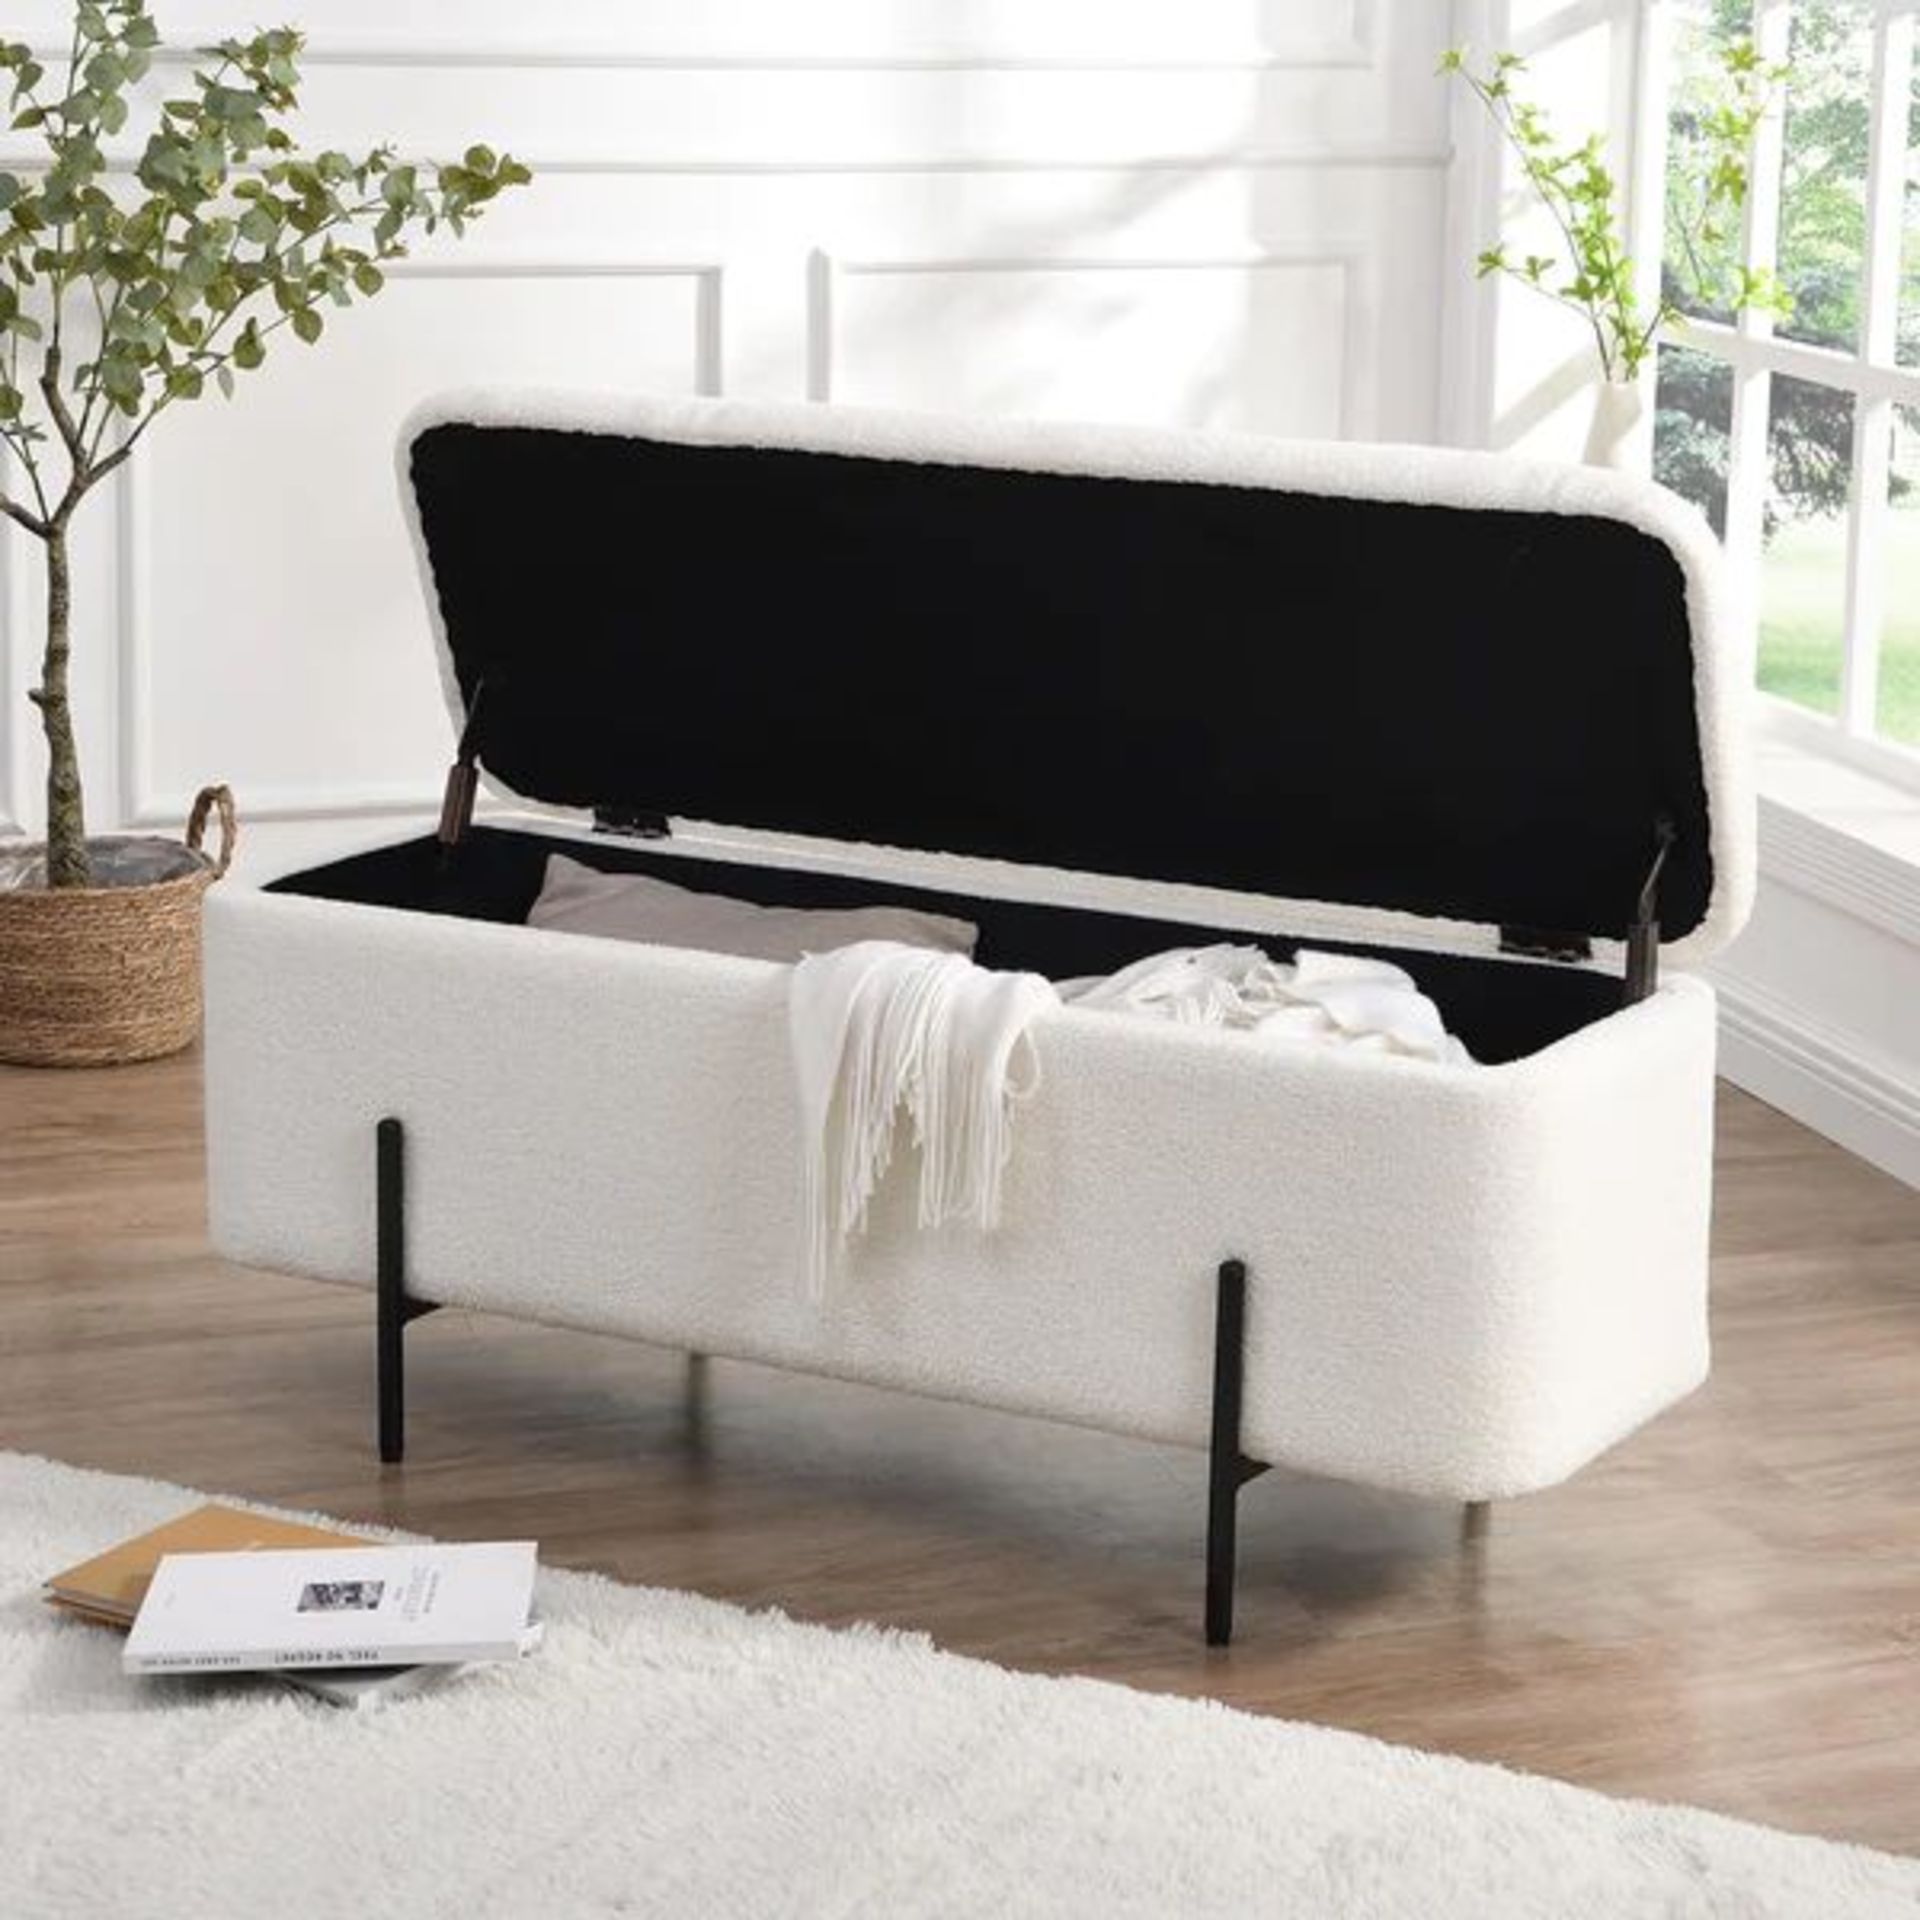 Jed Ecru Boucle 120cm Large Storage Ottoman Bench. - ER31. RRP £199.99. Upholstered in cosy teddy - Image 2 of 2